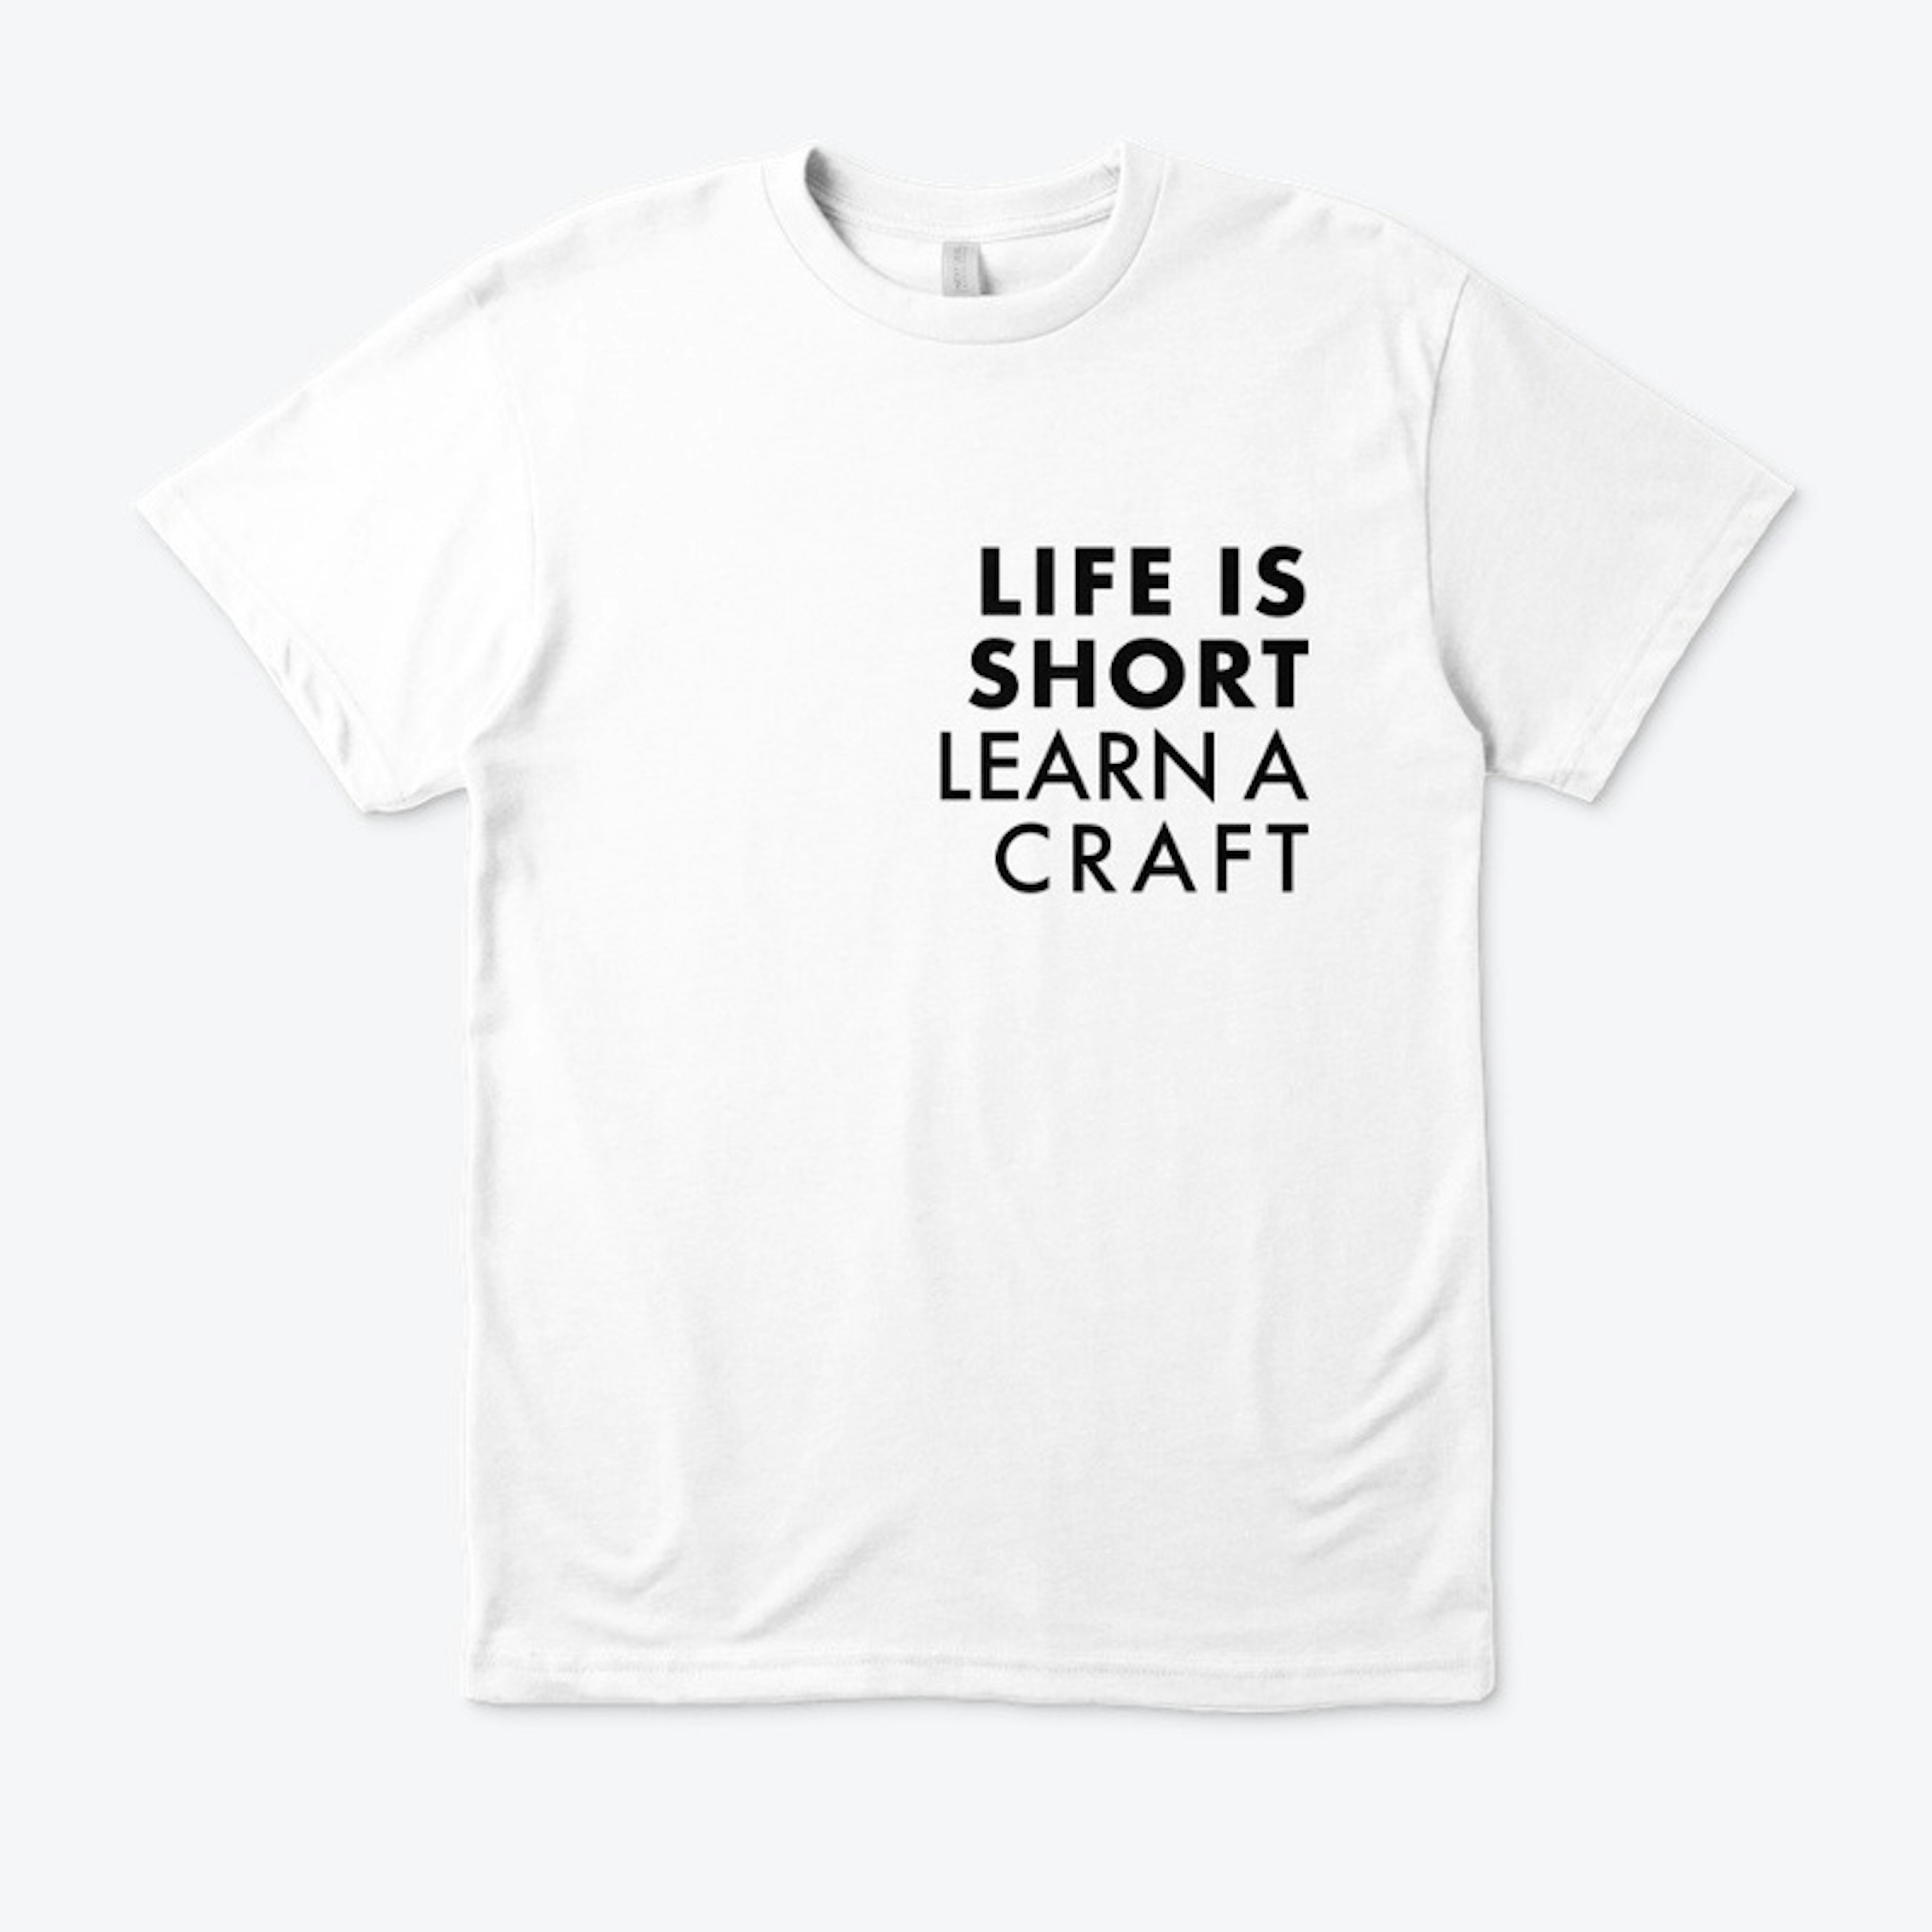 Life is short, learn a craft